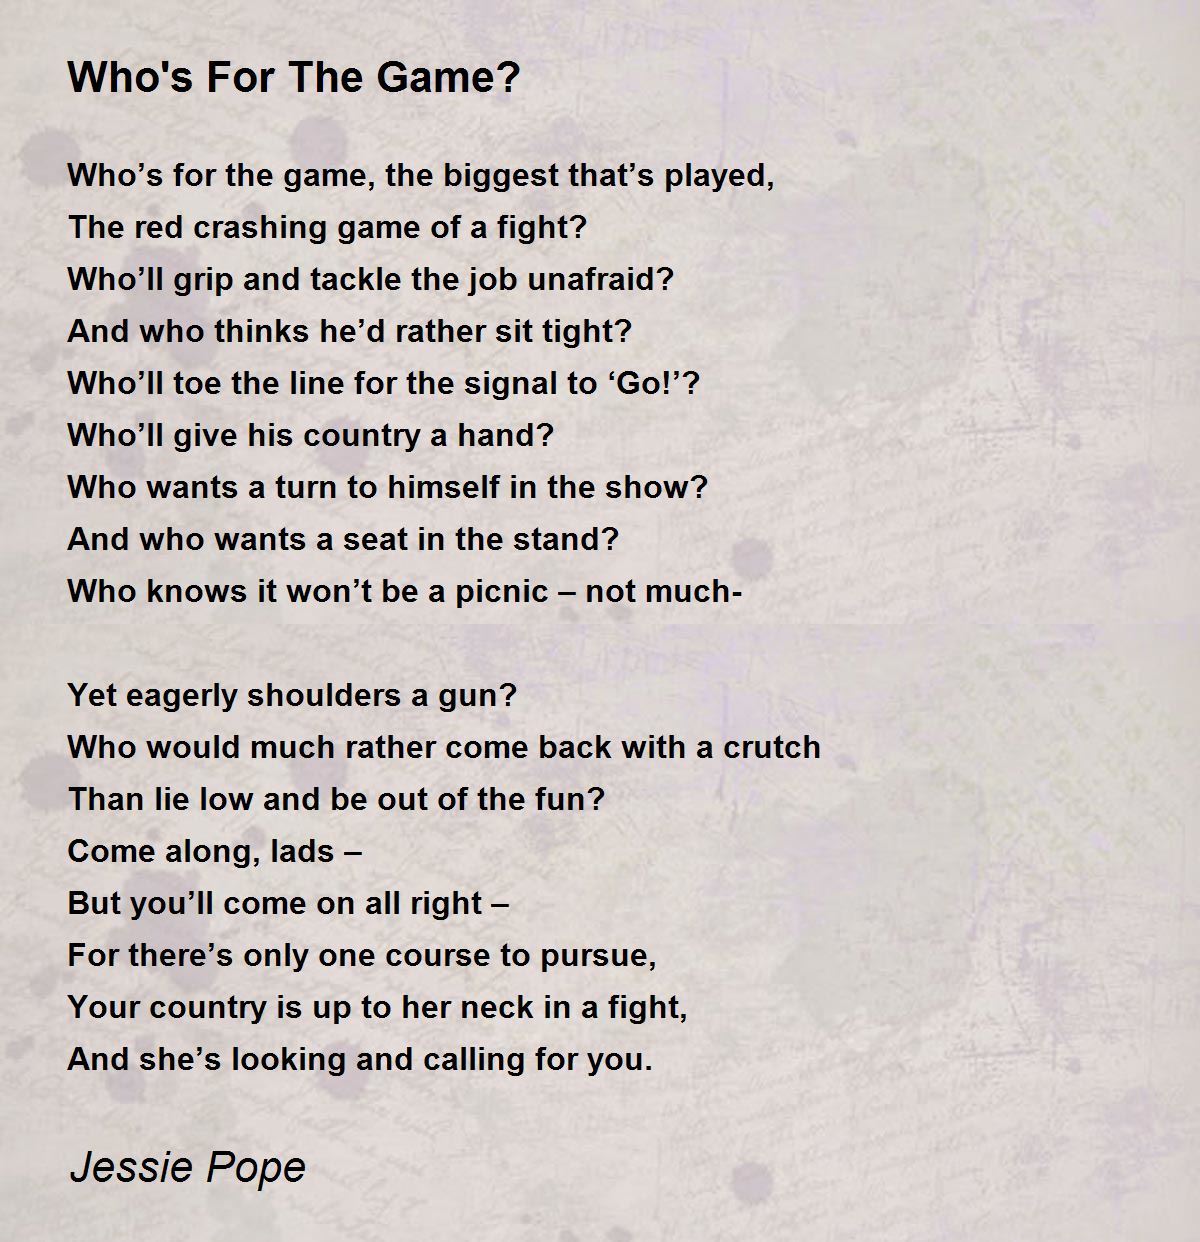 Who's For The Game? Who's For Game? by Jessie Pope